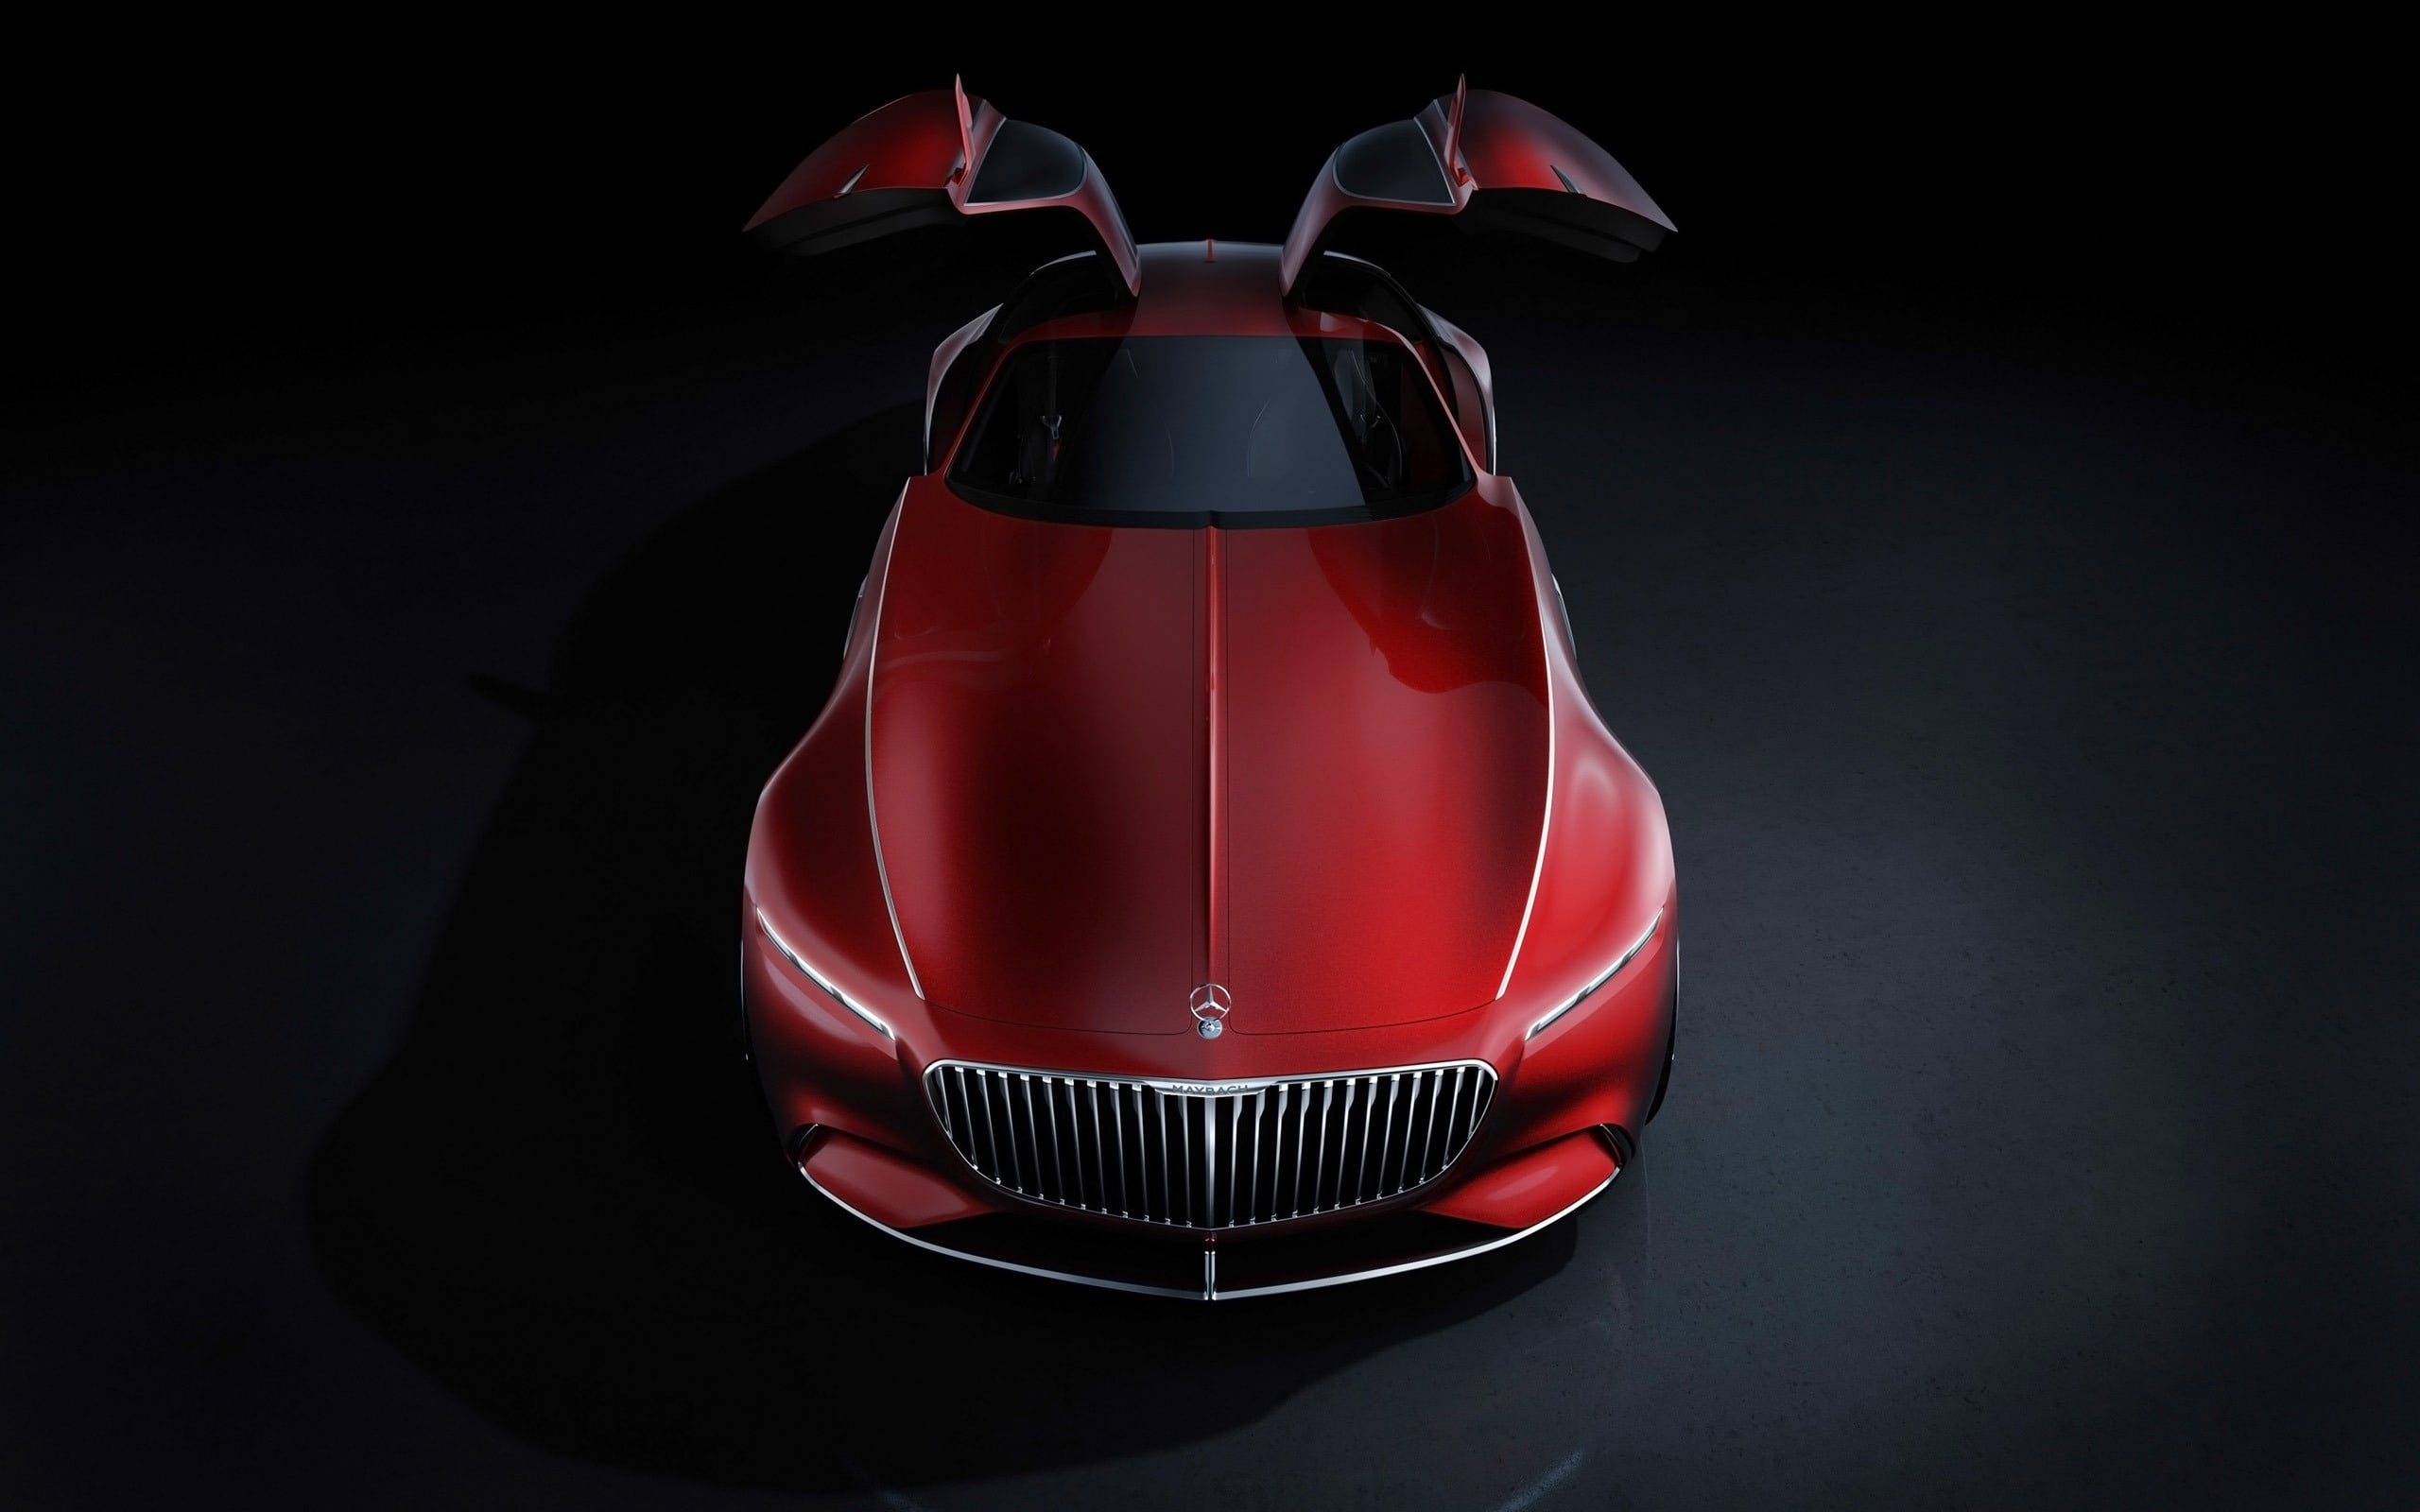 2016 Vision Mercedes-Maybach 6 Concept Wallpaper 0.., black background